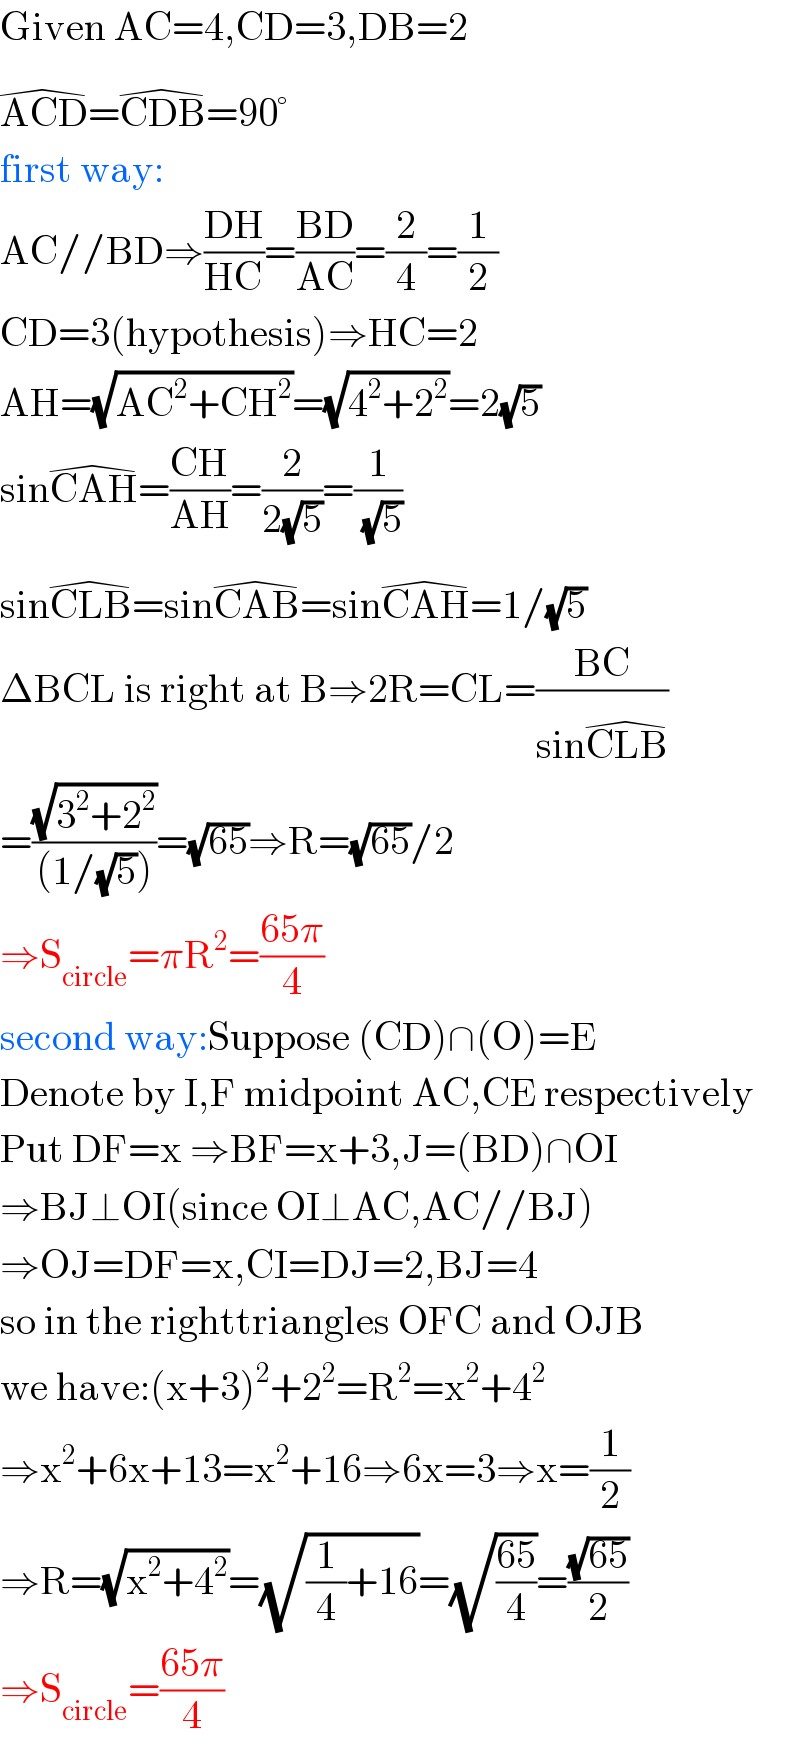 Given AC=4,CD=3,DB=2  ACD^(�) =CDB^(�) =90°  first way:  AC//BD⇒((DH)/(HC))=((BD)/(AC))=(2/4)=(1/2)  CD=3(hypothesis)⇒HC=2  AH=(√(AC^2 +CH^2 ))=(√(4^2 +2^2 ))=2(√5)  sinCAH^(�) =((CH)/(AH))=(2/(2(√5)))=(1/( (√5)))  sinCLB^(�) =sinCAB^(�) =sinCAH^(�) =1/(√5)  ΔBCL is right at B⇒2R=CL=((BC)/(sinCLB^(�) ))  =((√(3^2 +2^2 ))/((1/(√5))))=(√(65))⇒R=(√(65))/2  ⇒S_(circle) =πR^2 =((65π)/4)  second way:Suppose (CD)∩(O)=E  Denote by I,F midpoint AC,CE respectively  Put DF=x ⇒BF=x+3,J=(BD)∩OI  ⇒BJ⊥OI(since OI⊥AC,AC//BJ)  ⇒OJ=DF=x,CI=DJ=2,BJ=4  so in the righttriangles OFC and OJB  we have:(x+3)^2 +2^2 =R^2 =x^2 +4^2   ⇒x^2 +6x+13=x^2 +16⇒6x=3⇒x=(1/2)  ⇒R=(√(x^2 +4^2 ))=(√((1/4)+16))=(√((65)/4))=((√(65))/2)  ⇒S_(circle) =((65π)/4)  